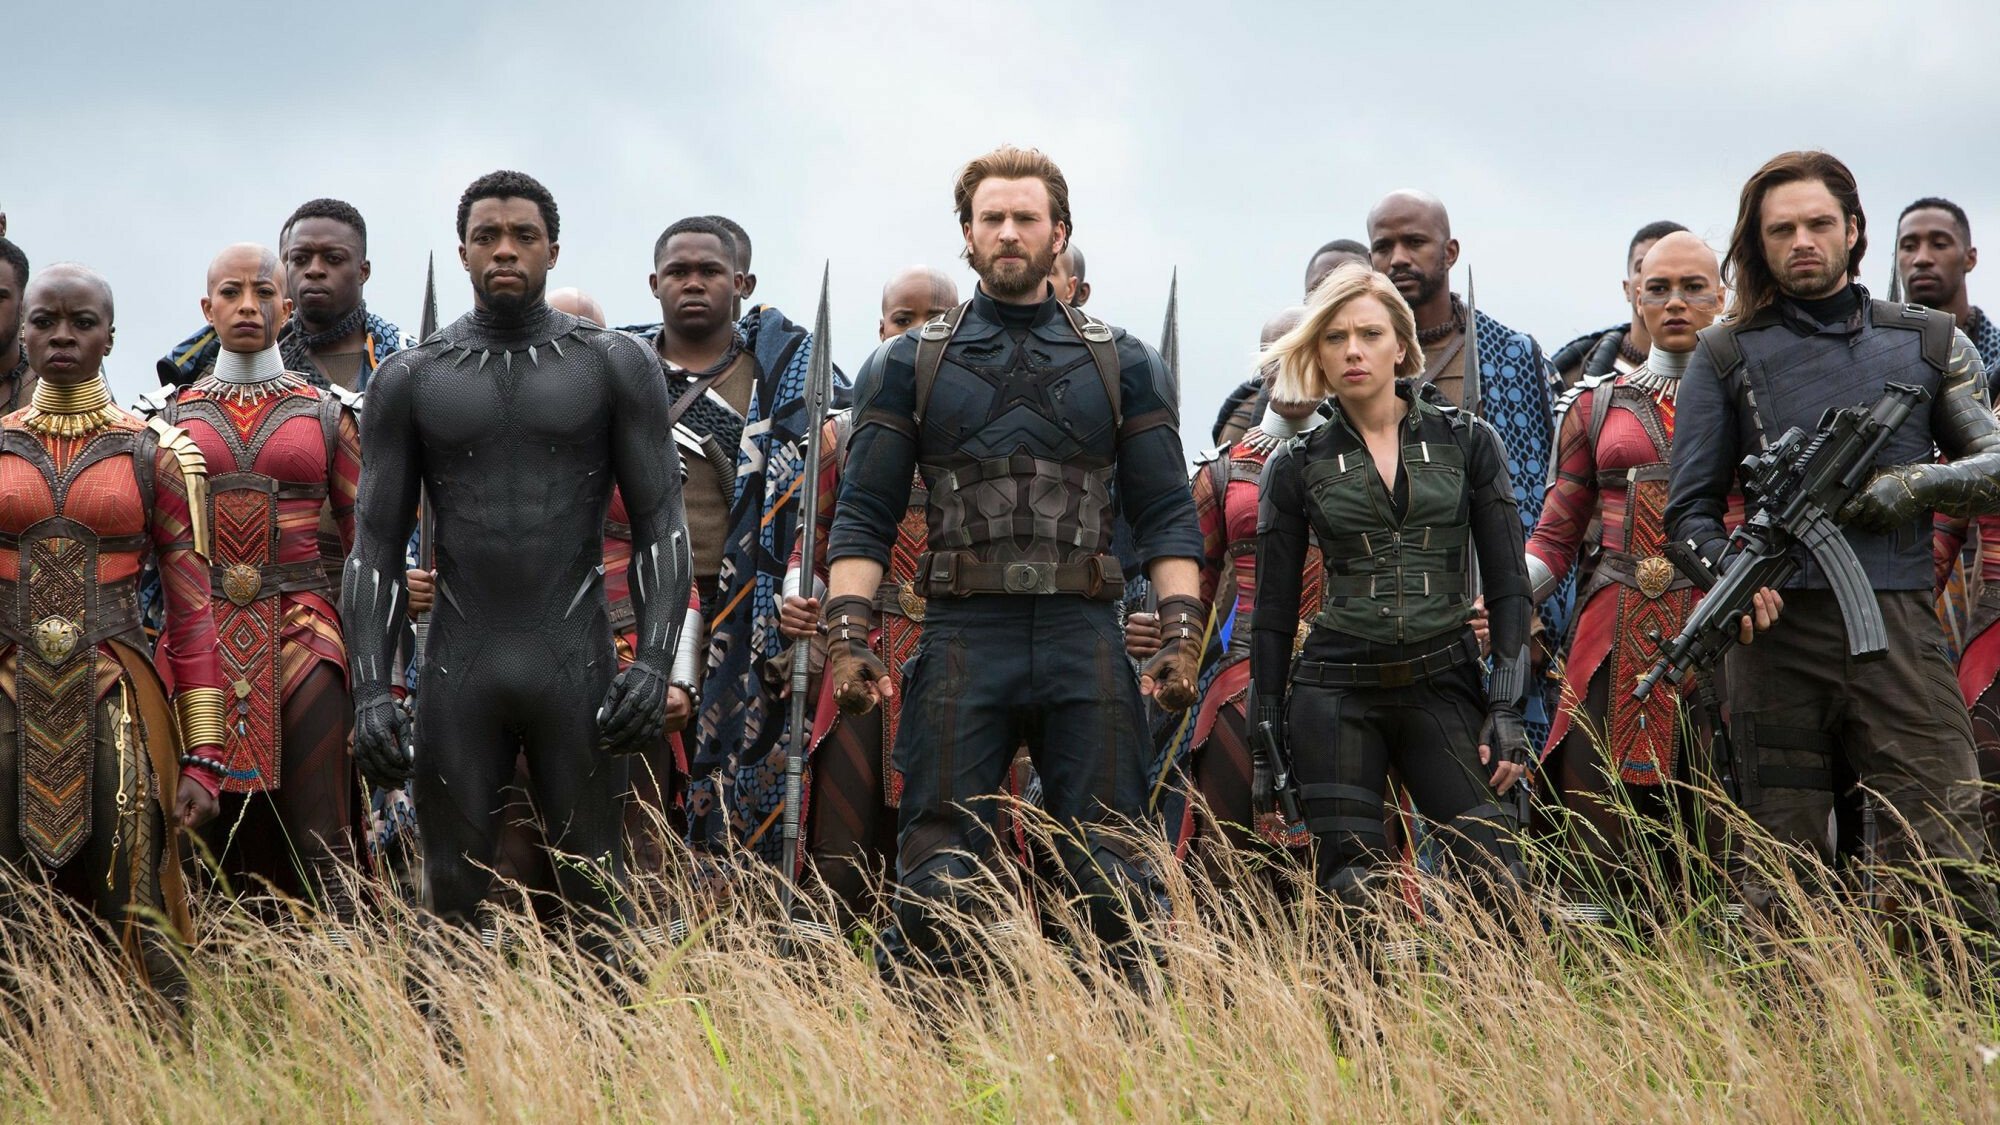 A promotional photo from Avengers: Infinity War, showing Black Panther, Captain America, Black Widow, the Winter Soldier, and numerous Wakandans ready for battle.